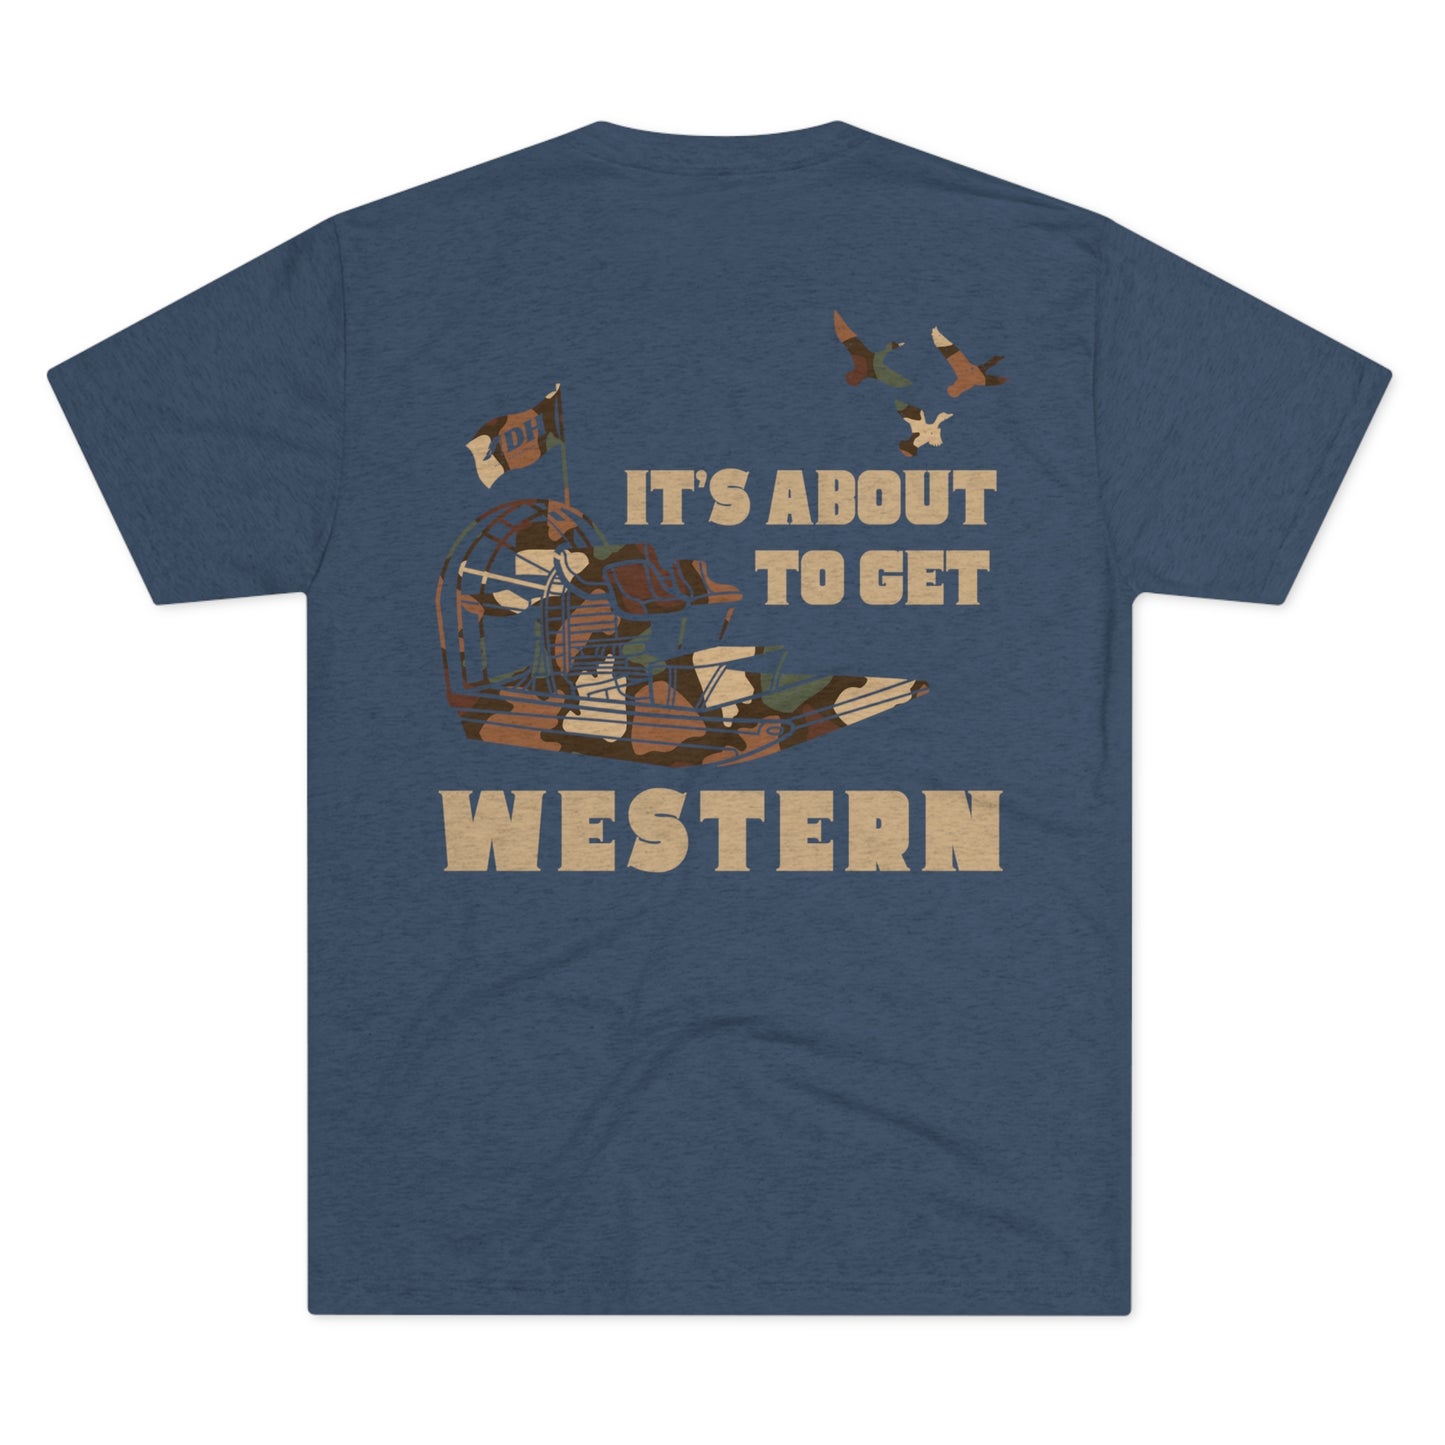 IT'S ABOUT TO GET WESTERN Tee (Multiple Color Options)